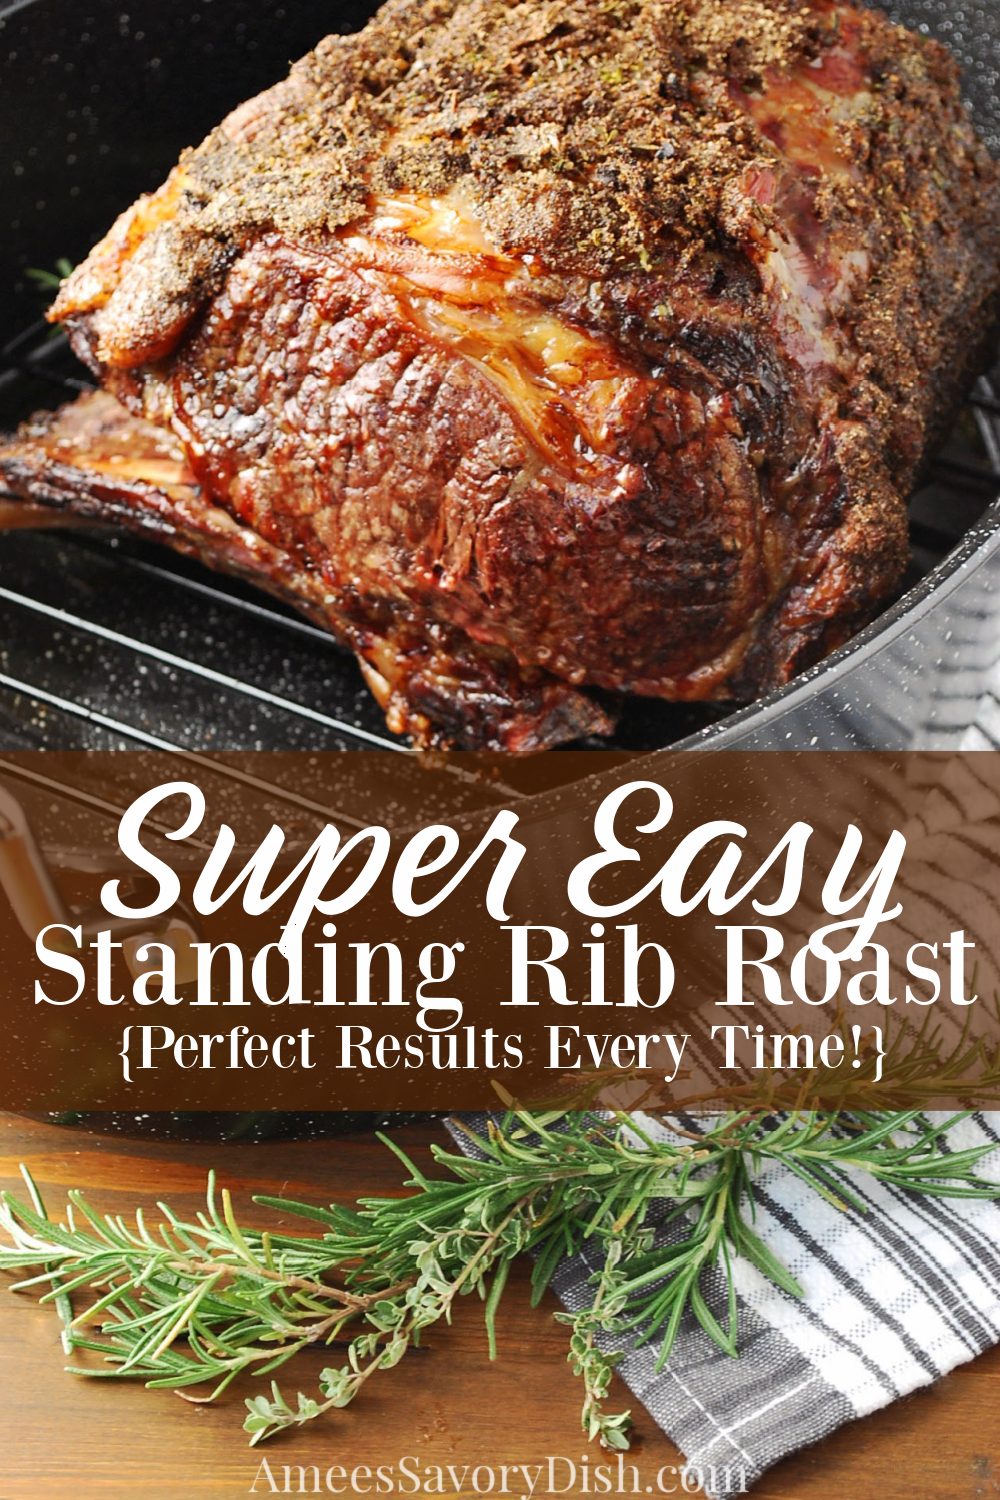 #Sponsored As impressive as it is, this Standing Rib Roast recipe is incredibly easy to make, and will be the star of your holiday meal! @beefitswhatsfordinner #beefitswhatsfordinner #NicelyDone #BeefFarmersandRanchers #beefuptheholidays #beefrecipe #standingribroast #primerib via @Ameessavorydish